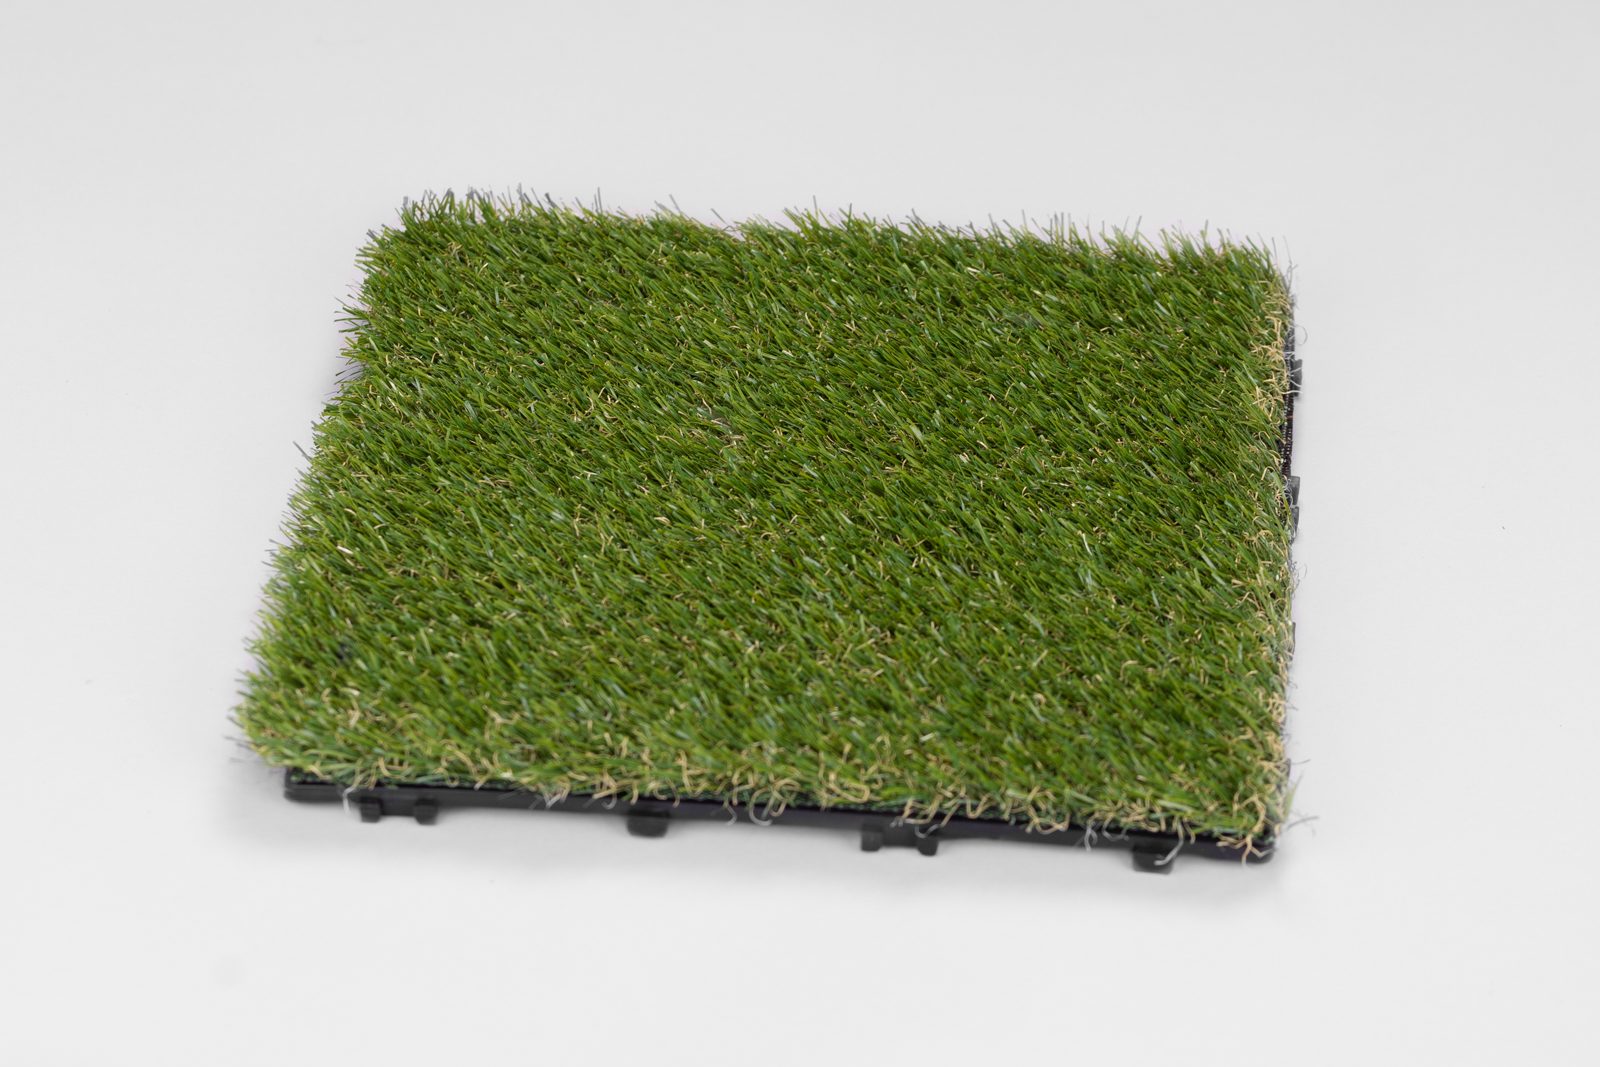 OUTLET -KingsBox Puzzle Grass Flooring - Green - 30 X 30cm